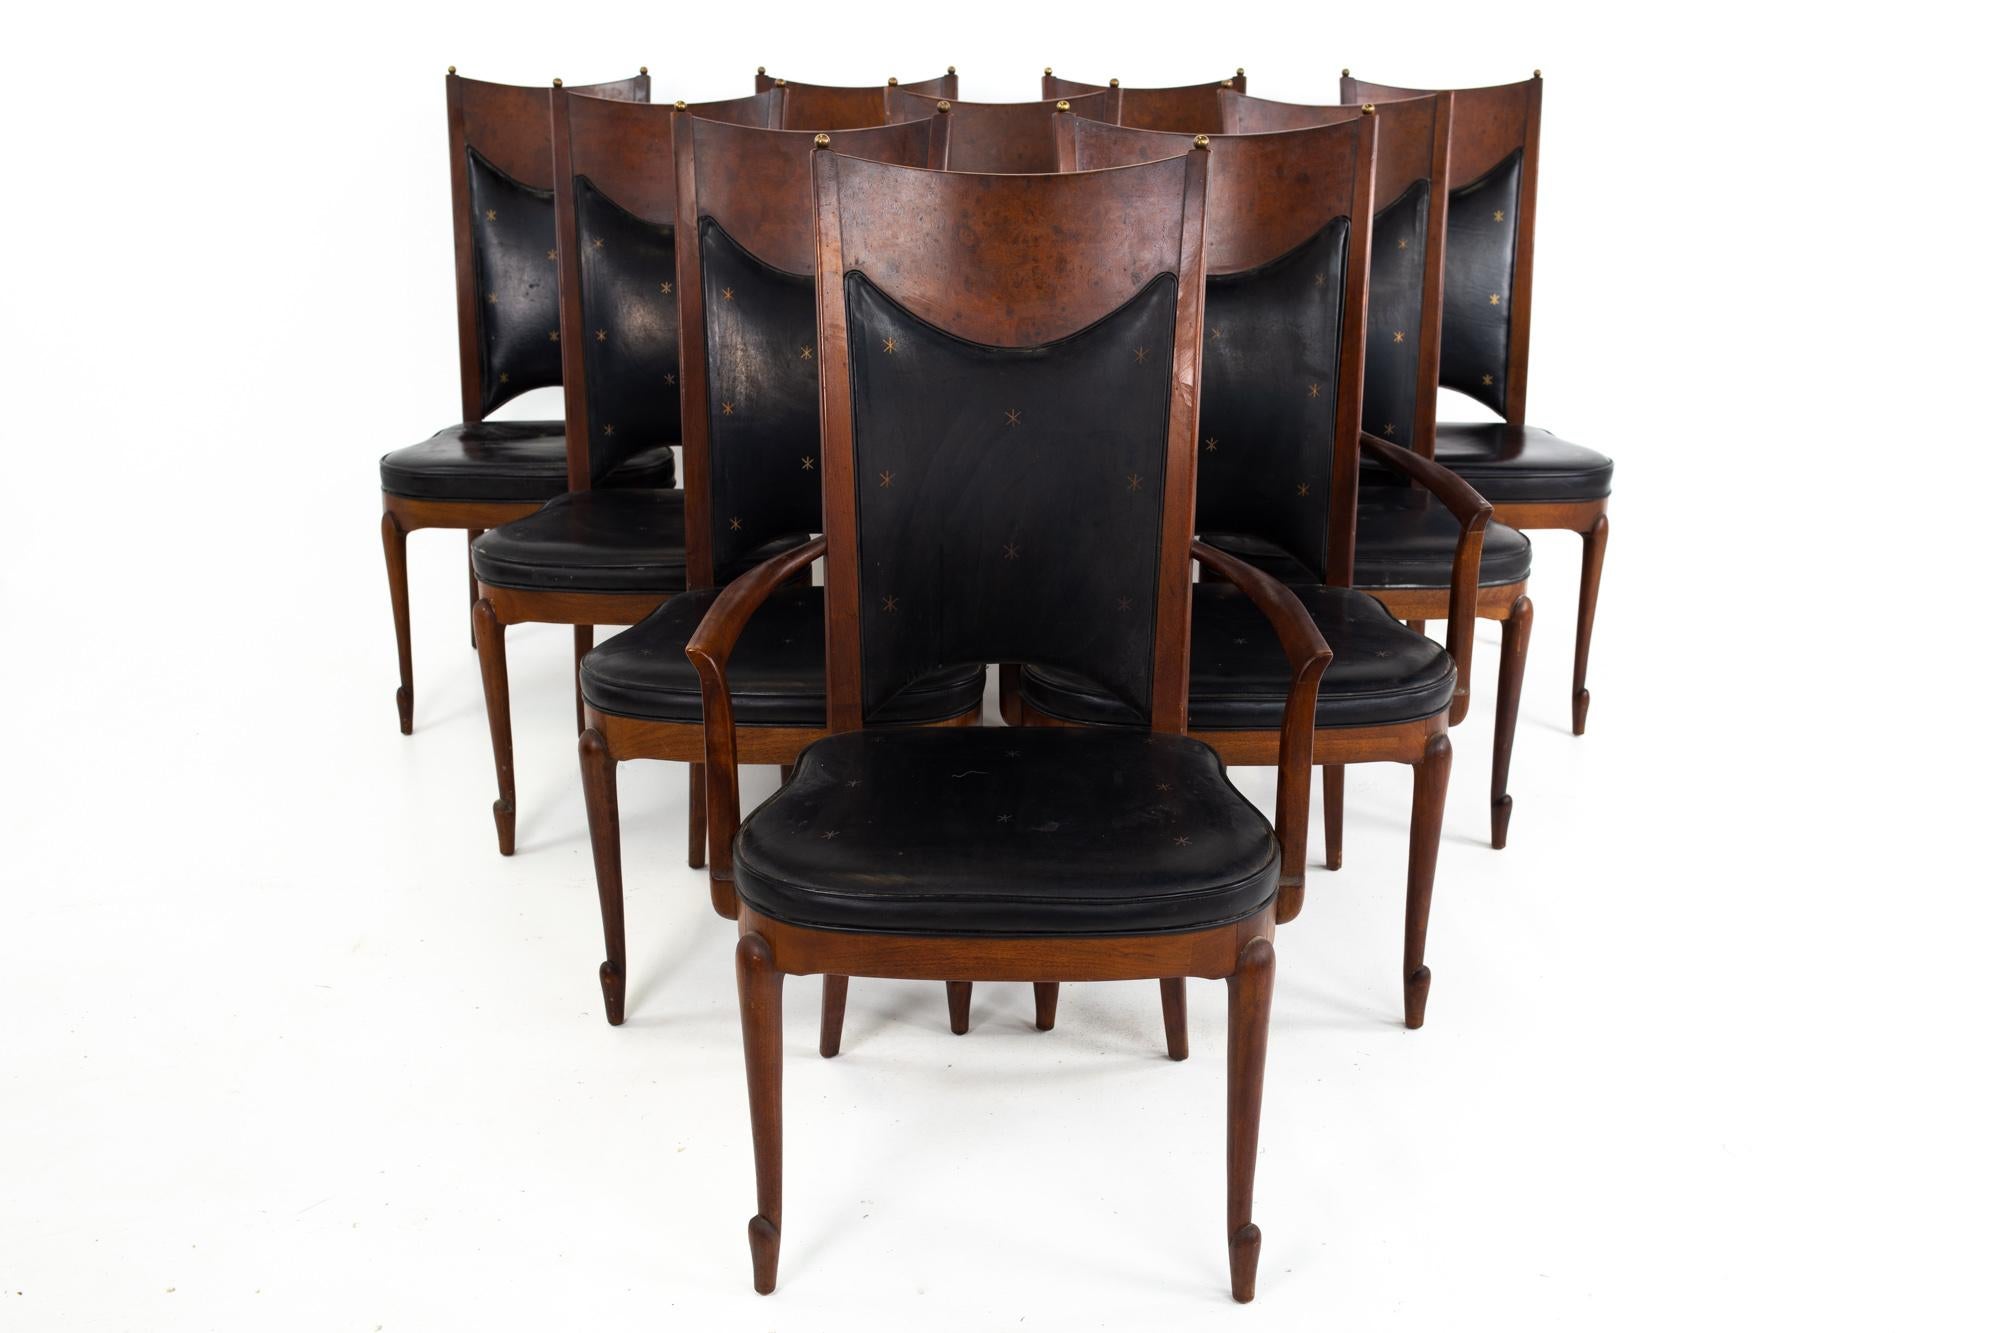 Mastercraft Mid Century walnut and burl wood dining chairs, set of 10
Each chair measures: 22.5 wide x 21.75 deep x 41 high, with a seat height 17.5 inches 

This set is available in what we call restored vintage condition. Upon purchase it is